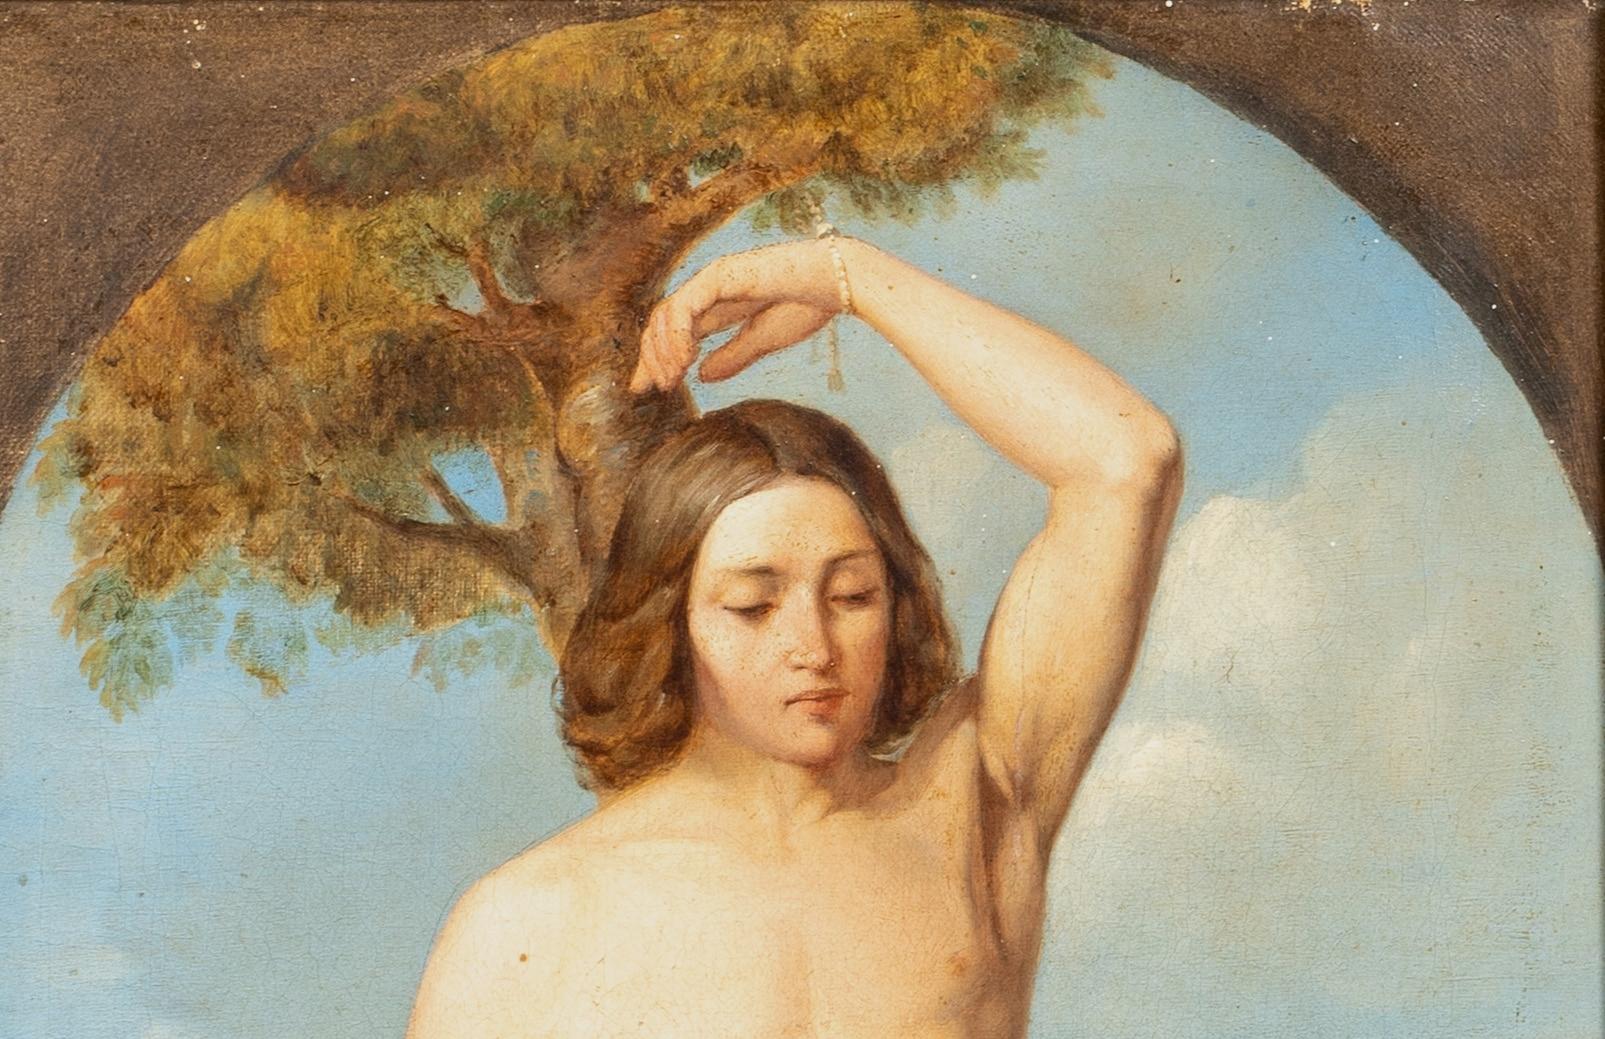 Saint Sebastian, 19th Century

by Alessandro REVERA (1830-1895)

19th Century Italian depiction of Saint Sebastian before his martyrdom, oil on canvas by Alessandro Revera. Good quality and condition full length depiction of the saint tied to a tree